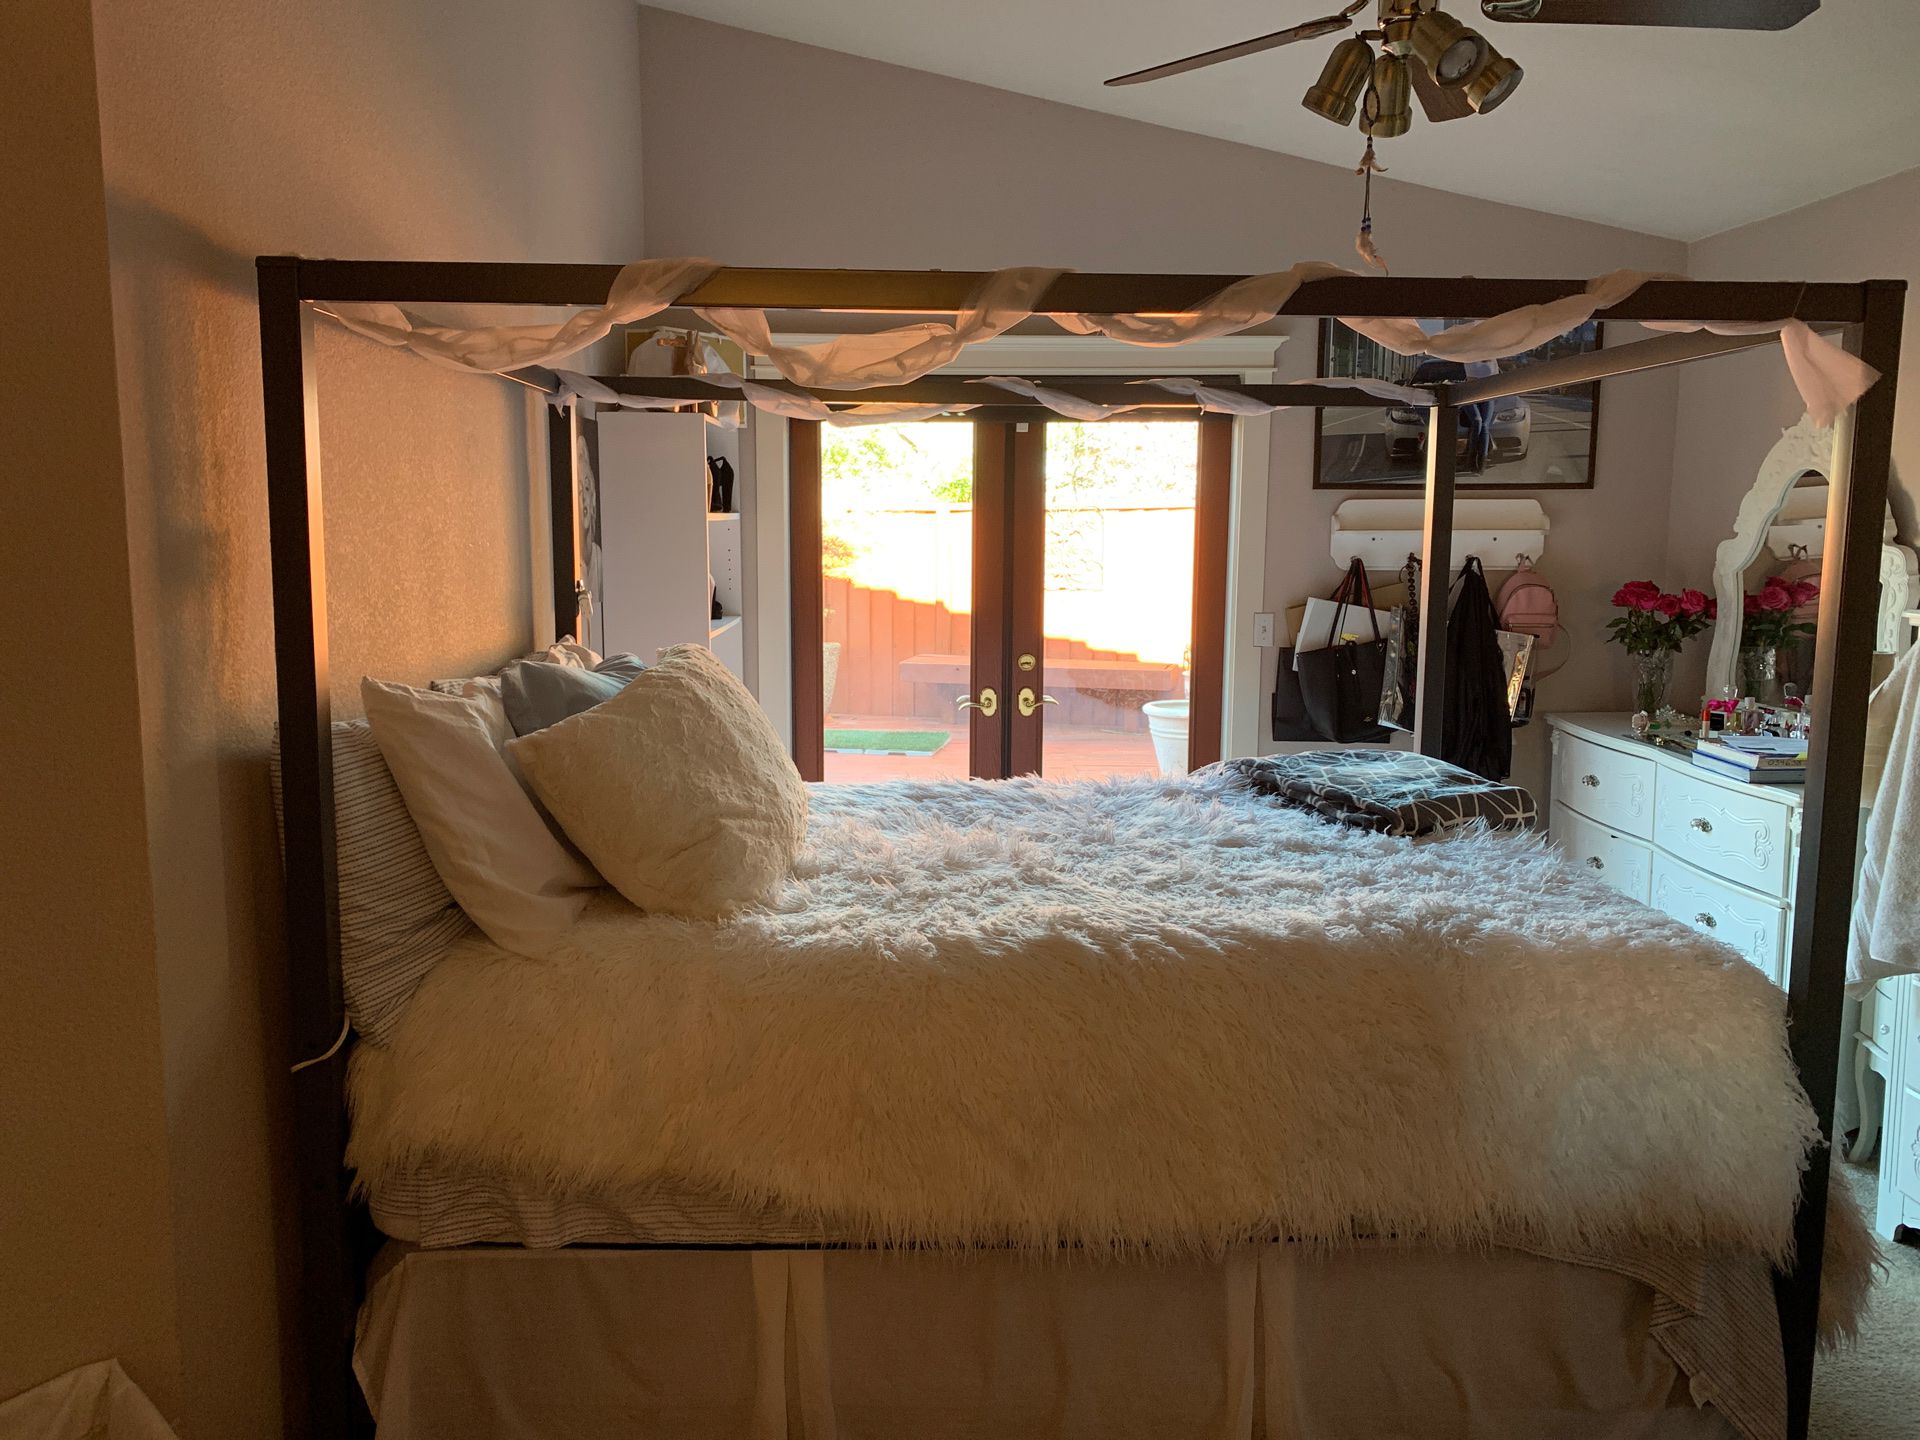 Canopy bed Frame